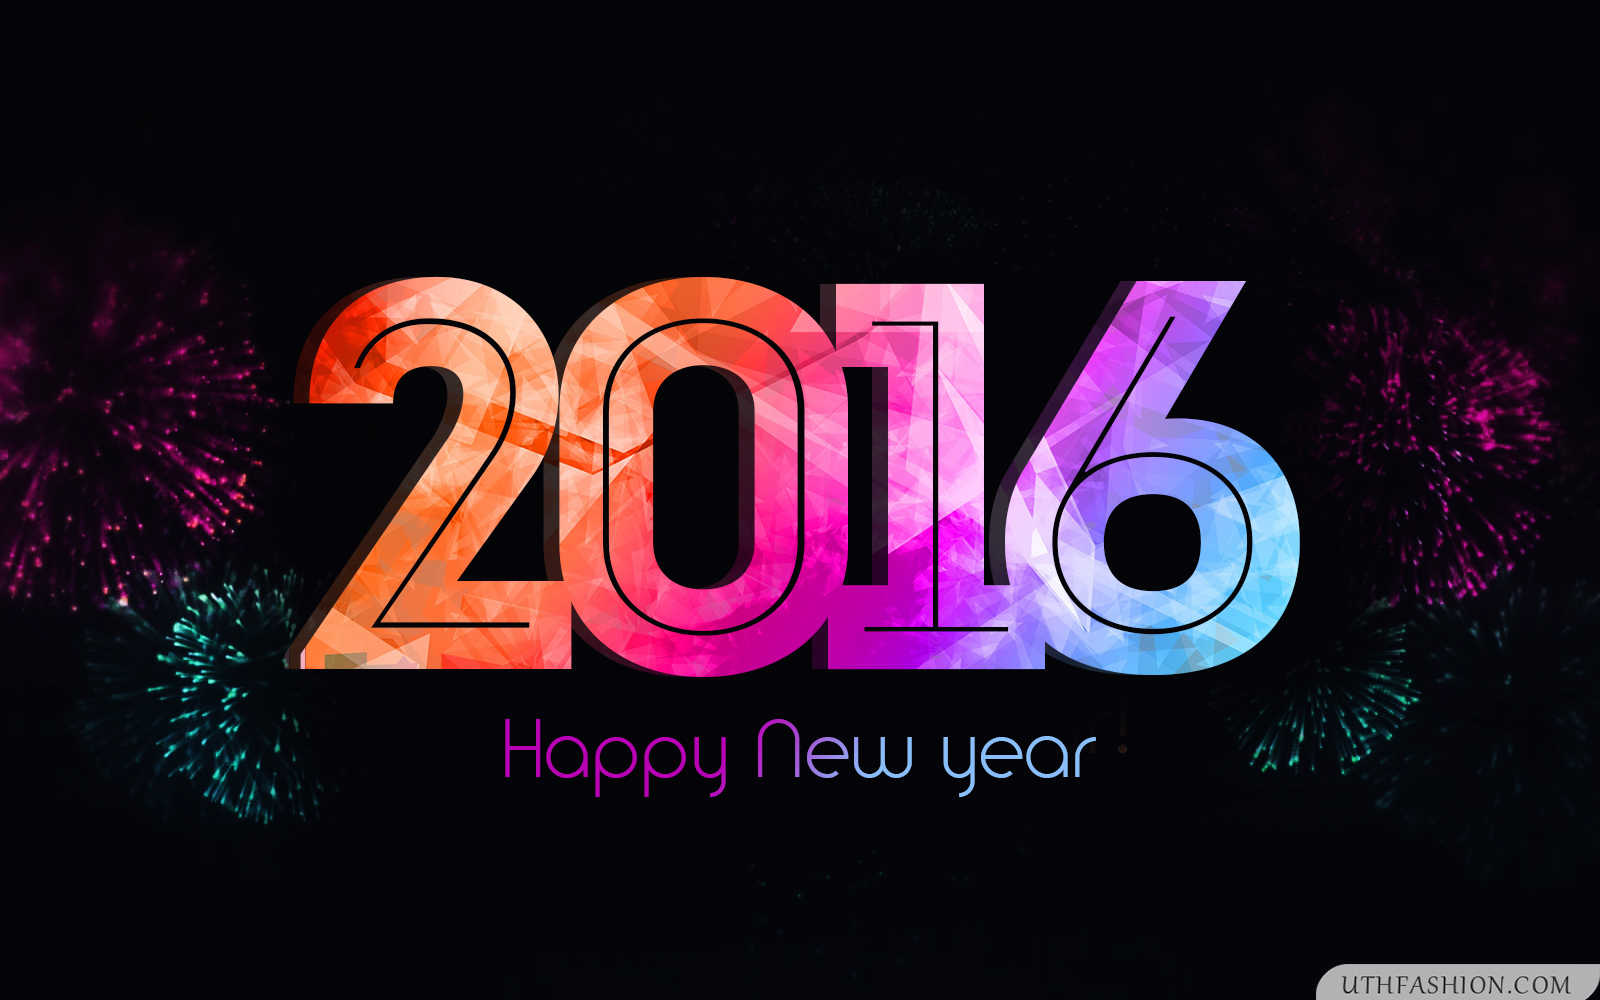 Beautiful Happy New Year Wallpapers HD (26)